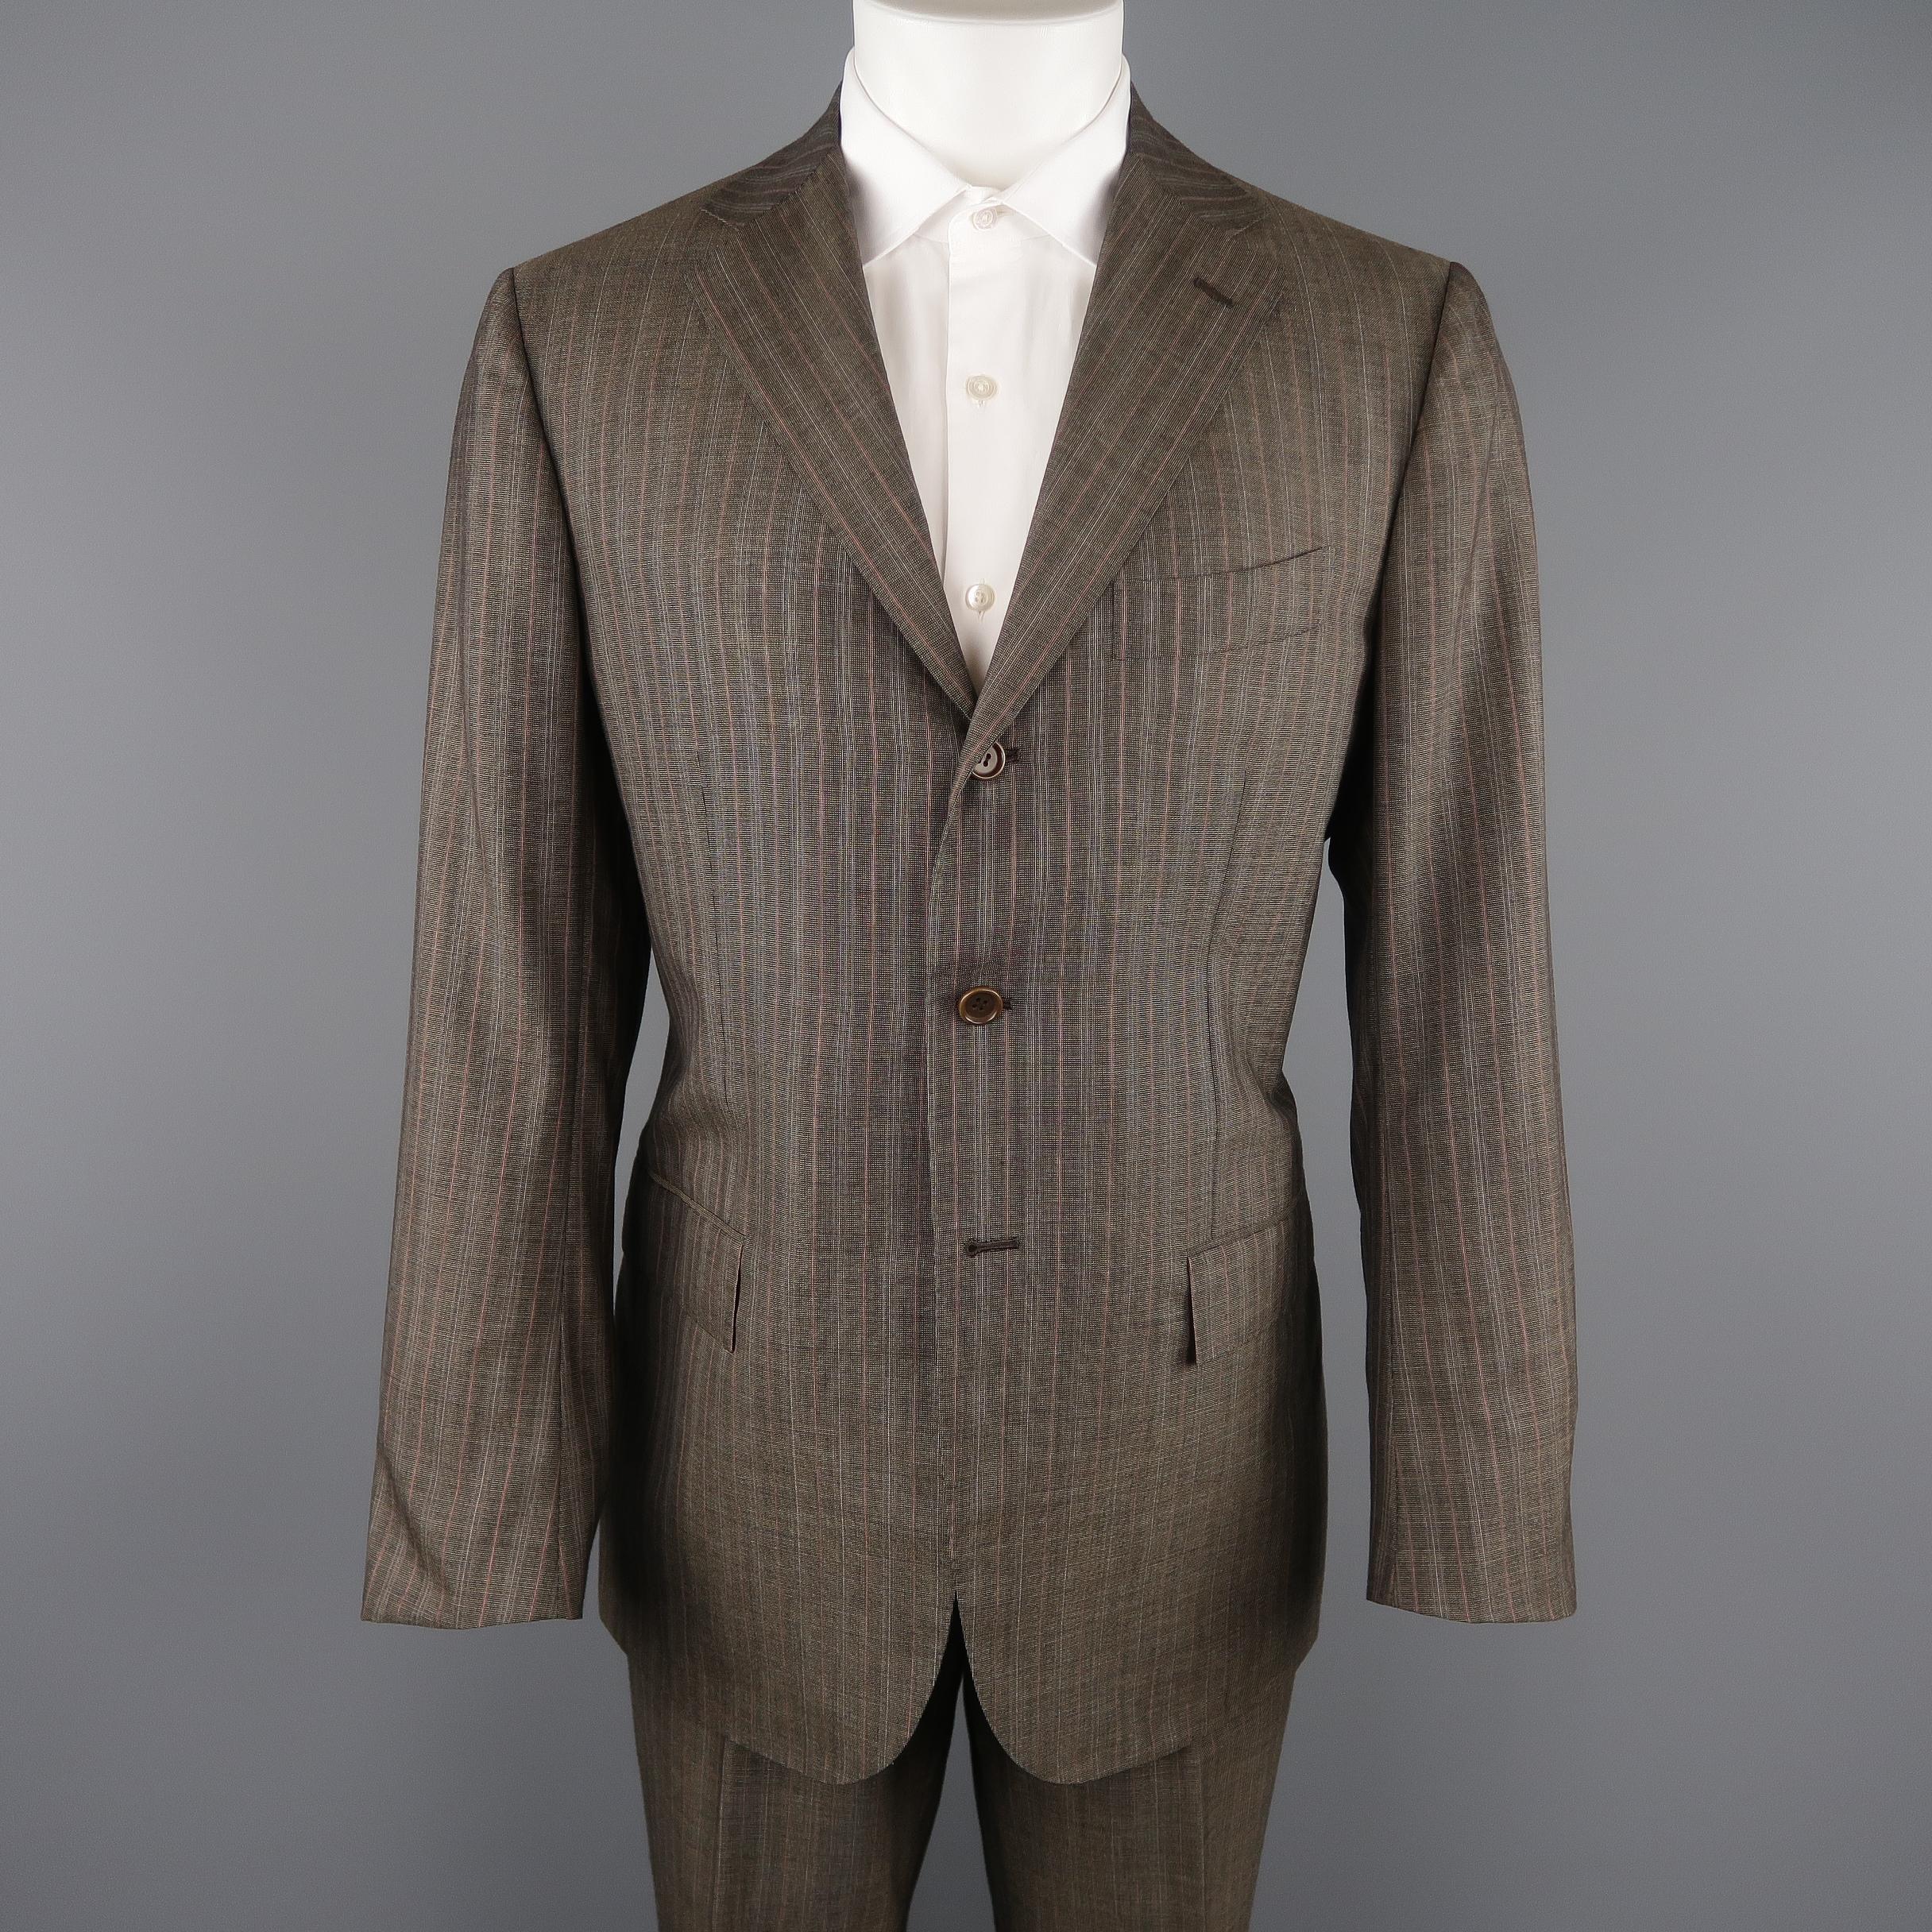 KITON two piece suit comes in brown Nailhead cashmere with an all over orange and beige pinstripe and includes a single breasted, three button, notch lapel sport coat  and matching flat front, cuffed trousers. 

Made in Italy. 
Excellent Pre-Owned